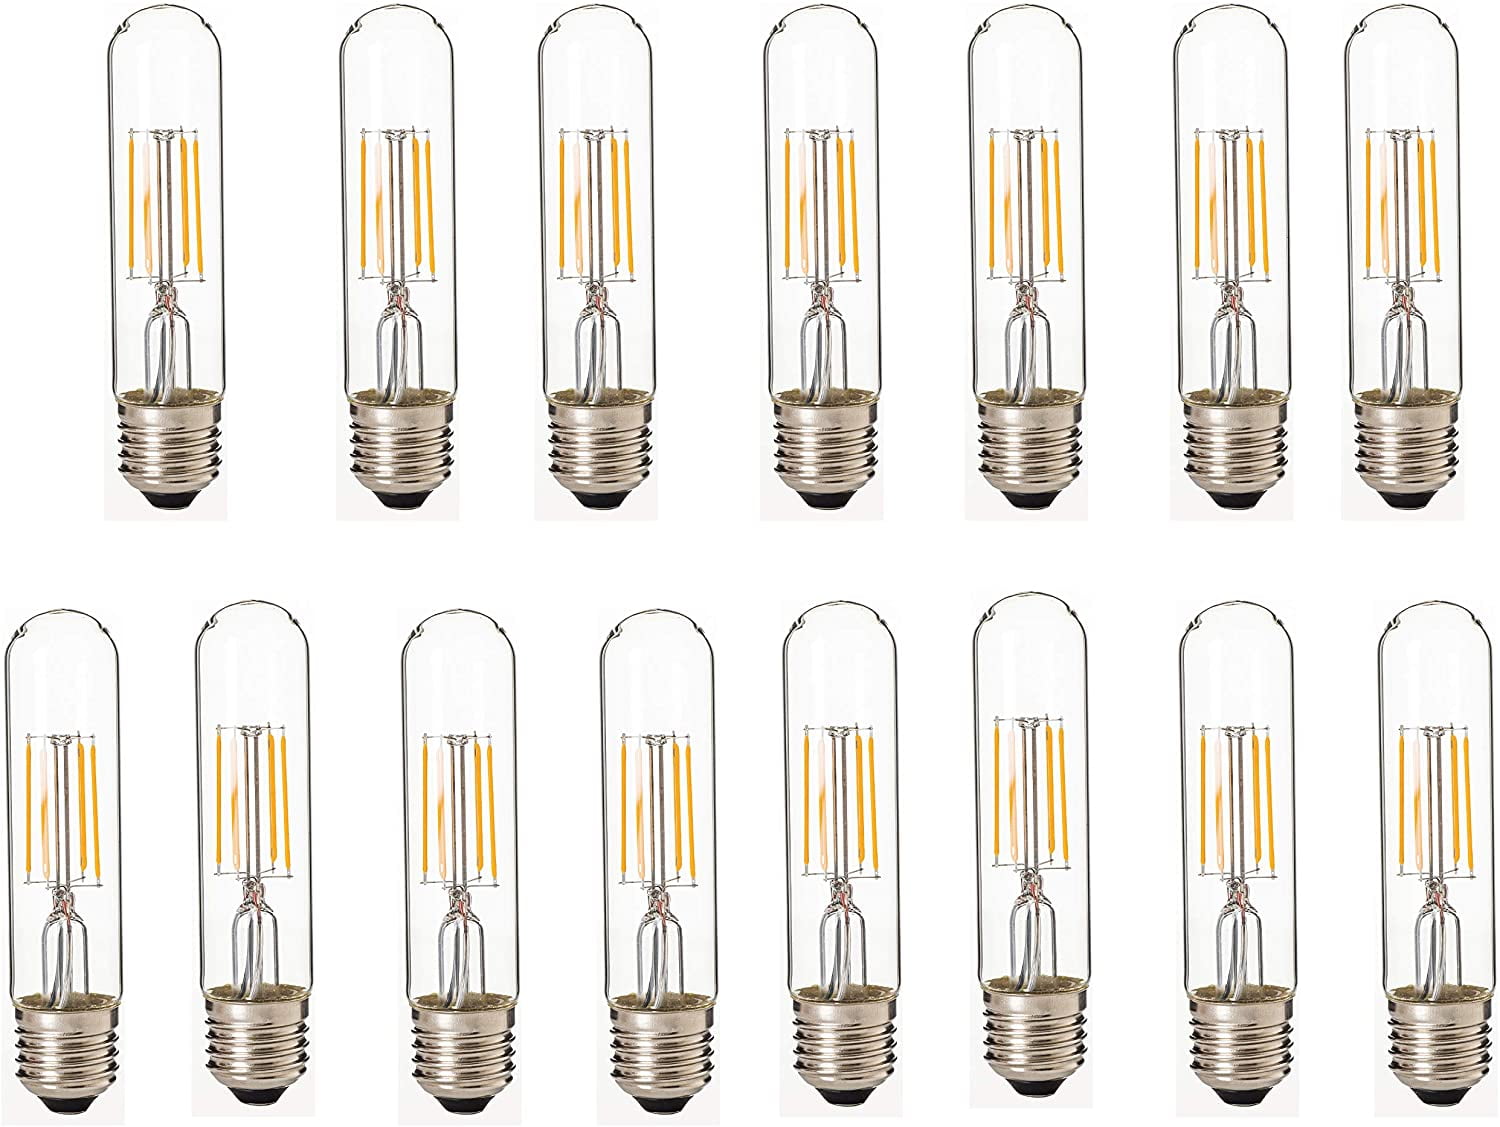 120VAC E26 Base 15PACK Soft White Dimmable 8W to Replace 75W Incandescent Bulbs 2700K UL Certified Clear Bulb LED2020 LED A21 Filament Light Bulb 